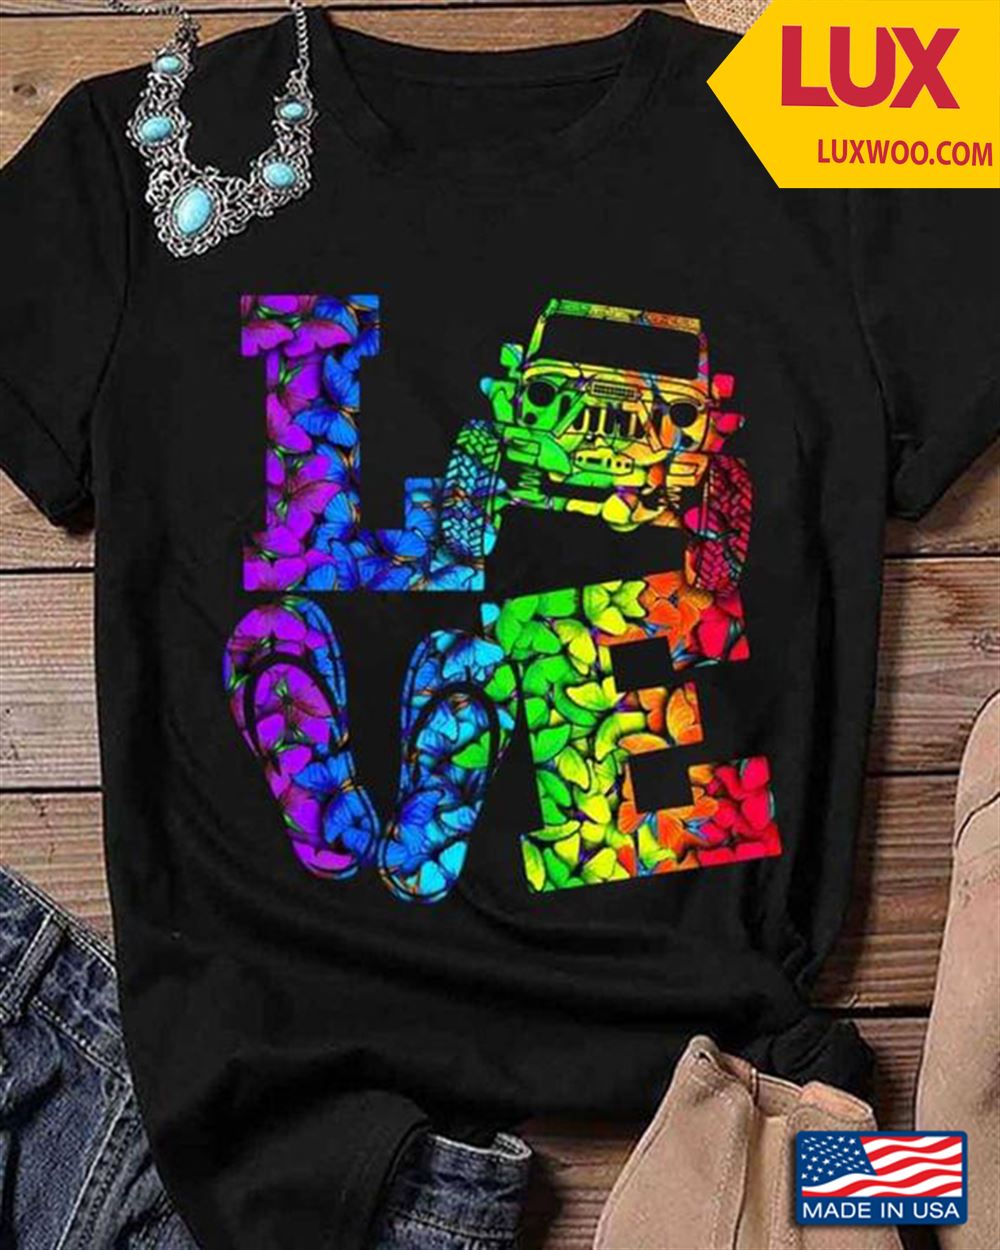 Colorful Love Jeep Butterflies Tshirt Size Up To 5xl